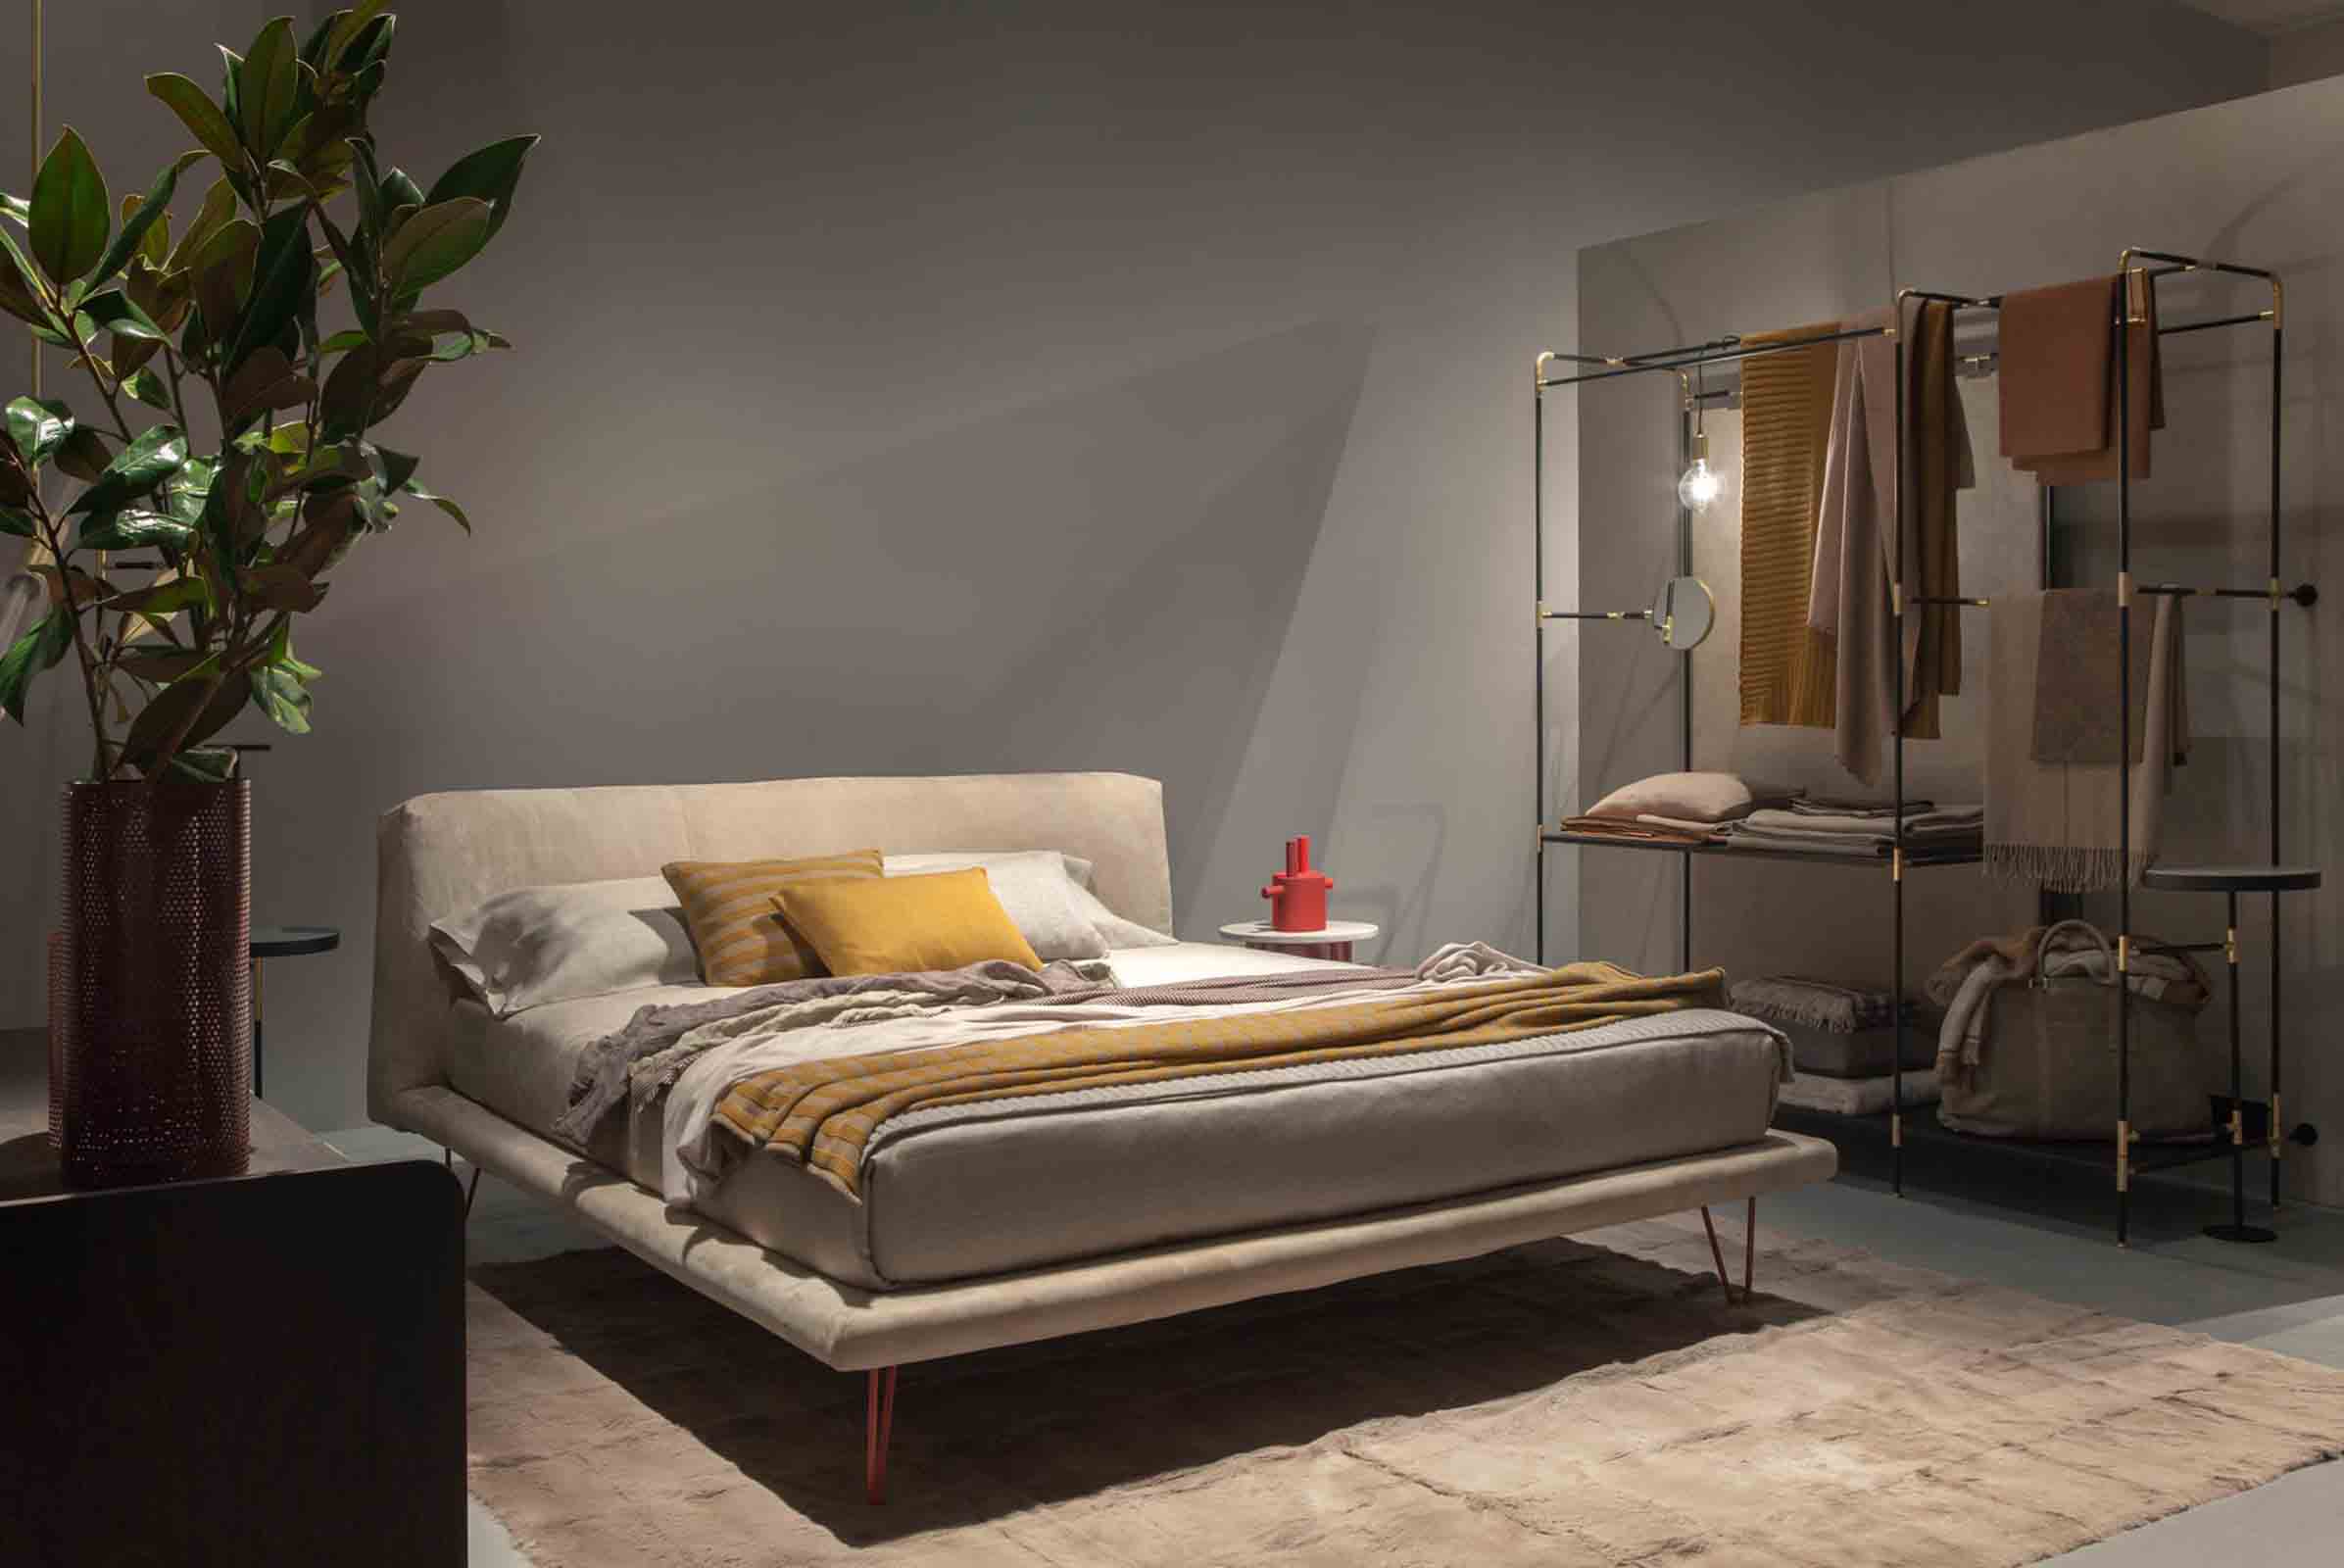 We loved everything from Ivano Raedelli, particularly the new Hayden bed and pret-a-porter storage units…